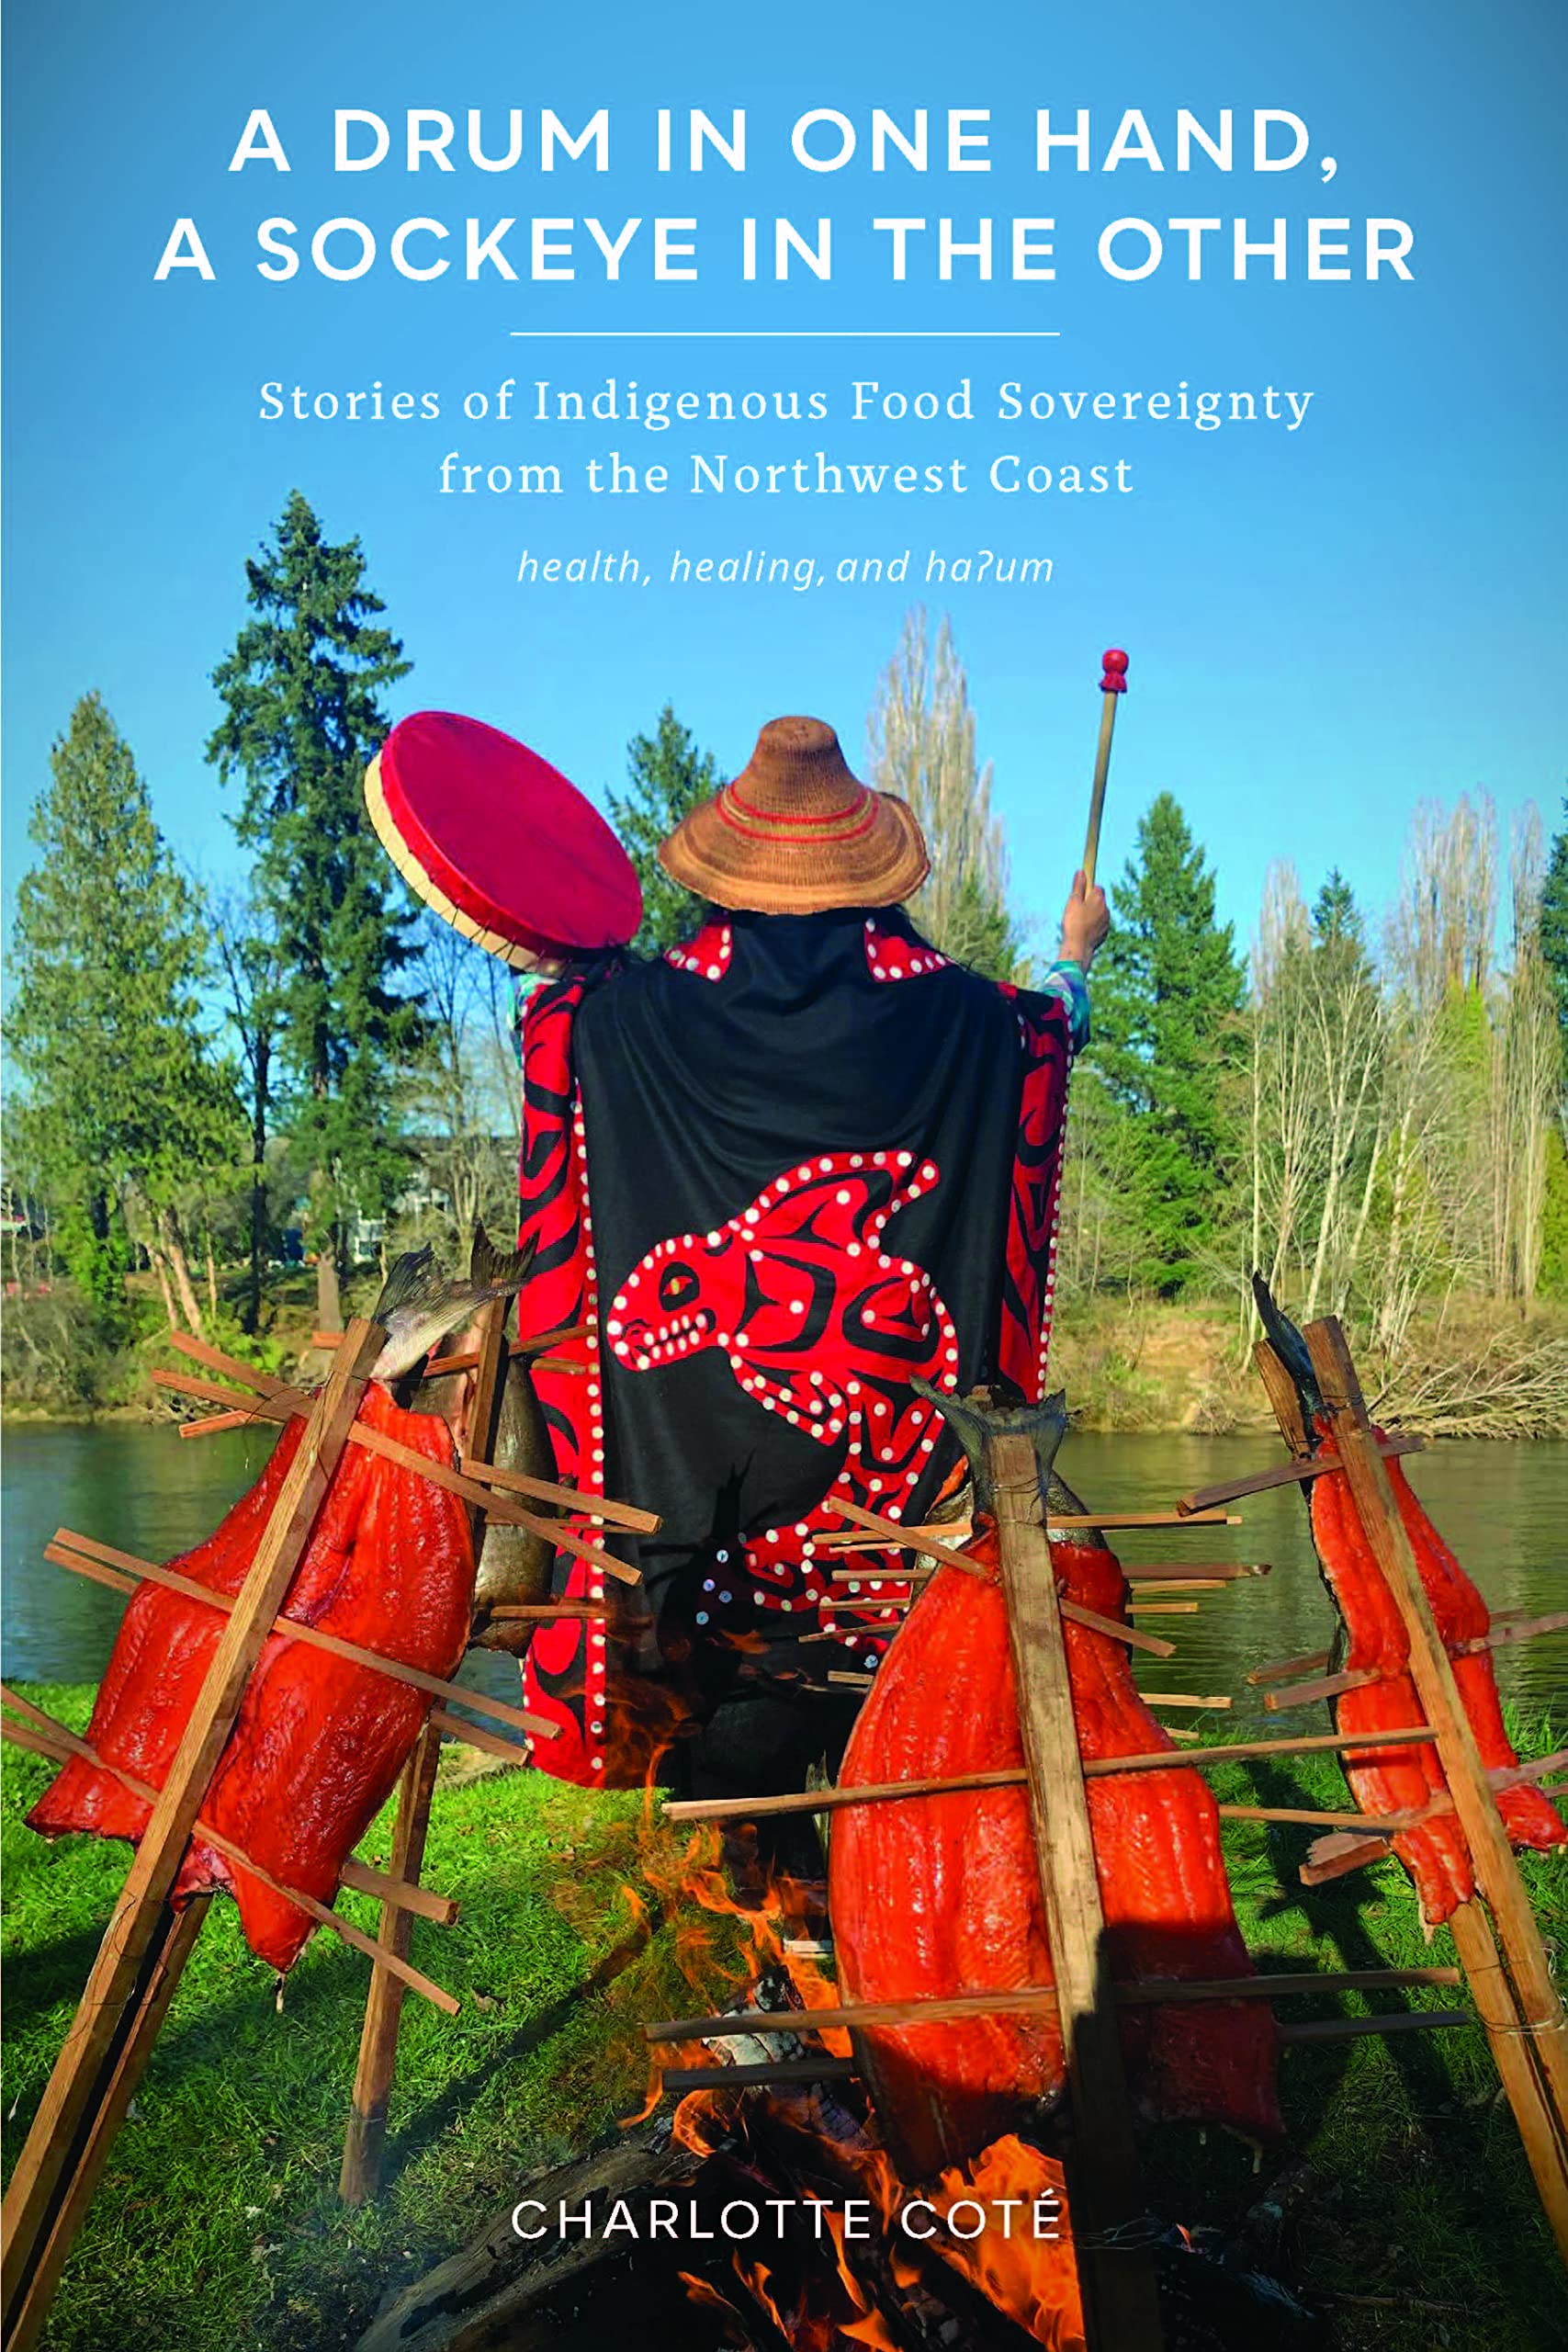 Book cover of A Drum in One Hand, a Sockeye in the Other with traditional salmon racks around a fire and a woman wearing a blanket with salmon embroidered on it and holding her hands in the air, a drum in one hand and a drumstick in the other